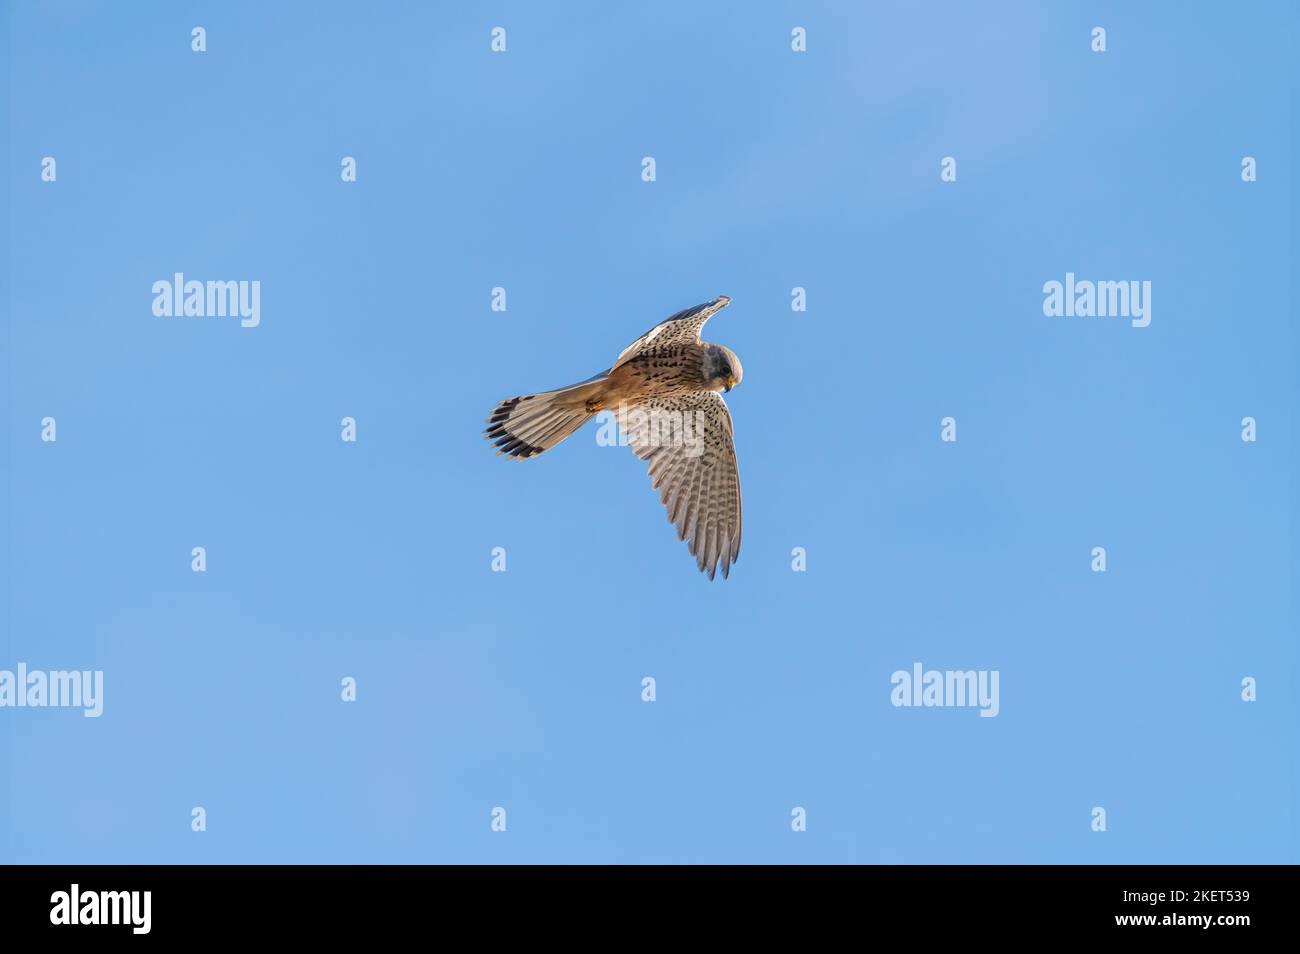 Male kestrel hovering in the clear blue sky looking down at the ground at RSPB Arne Stock Photo